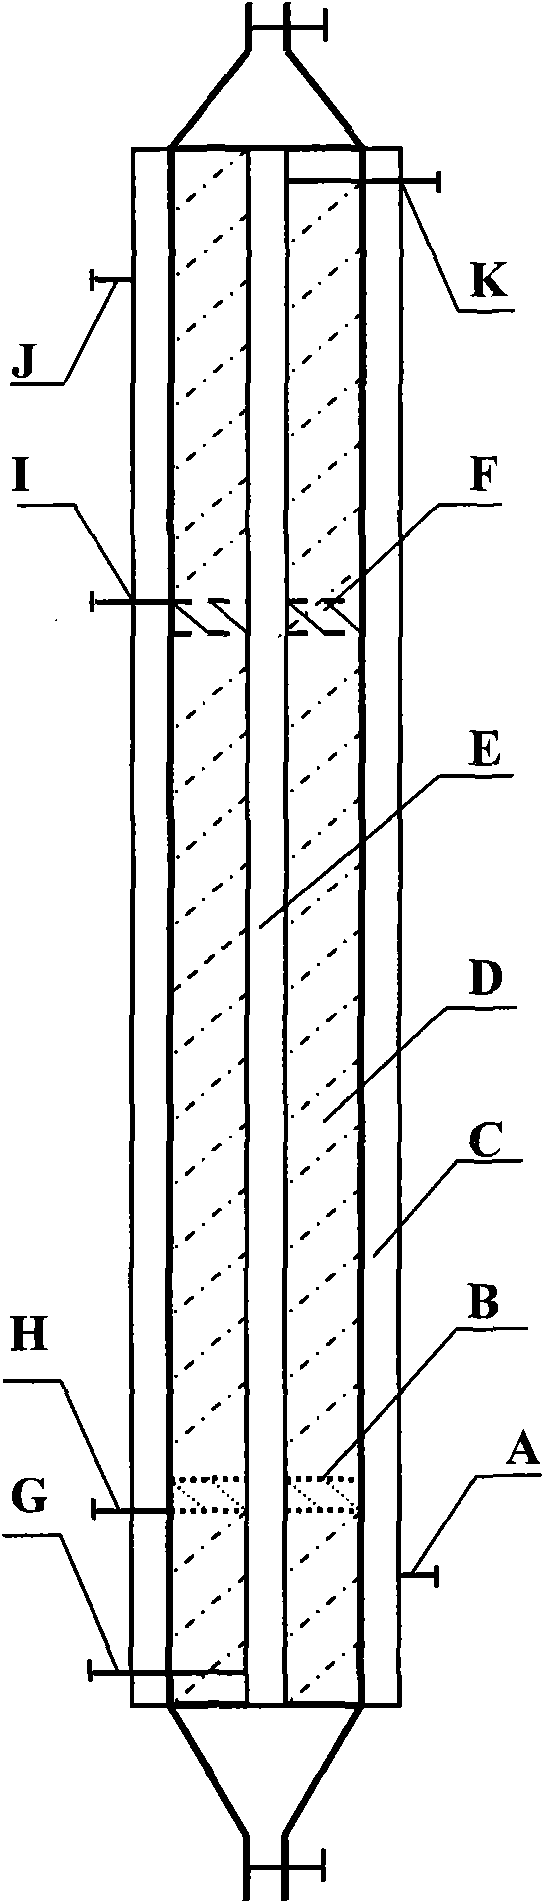 Reactor for preparing tetrabromoethane by addition reaction of bromine and acetylene and synthesis process